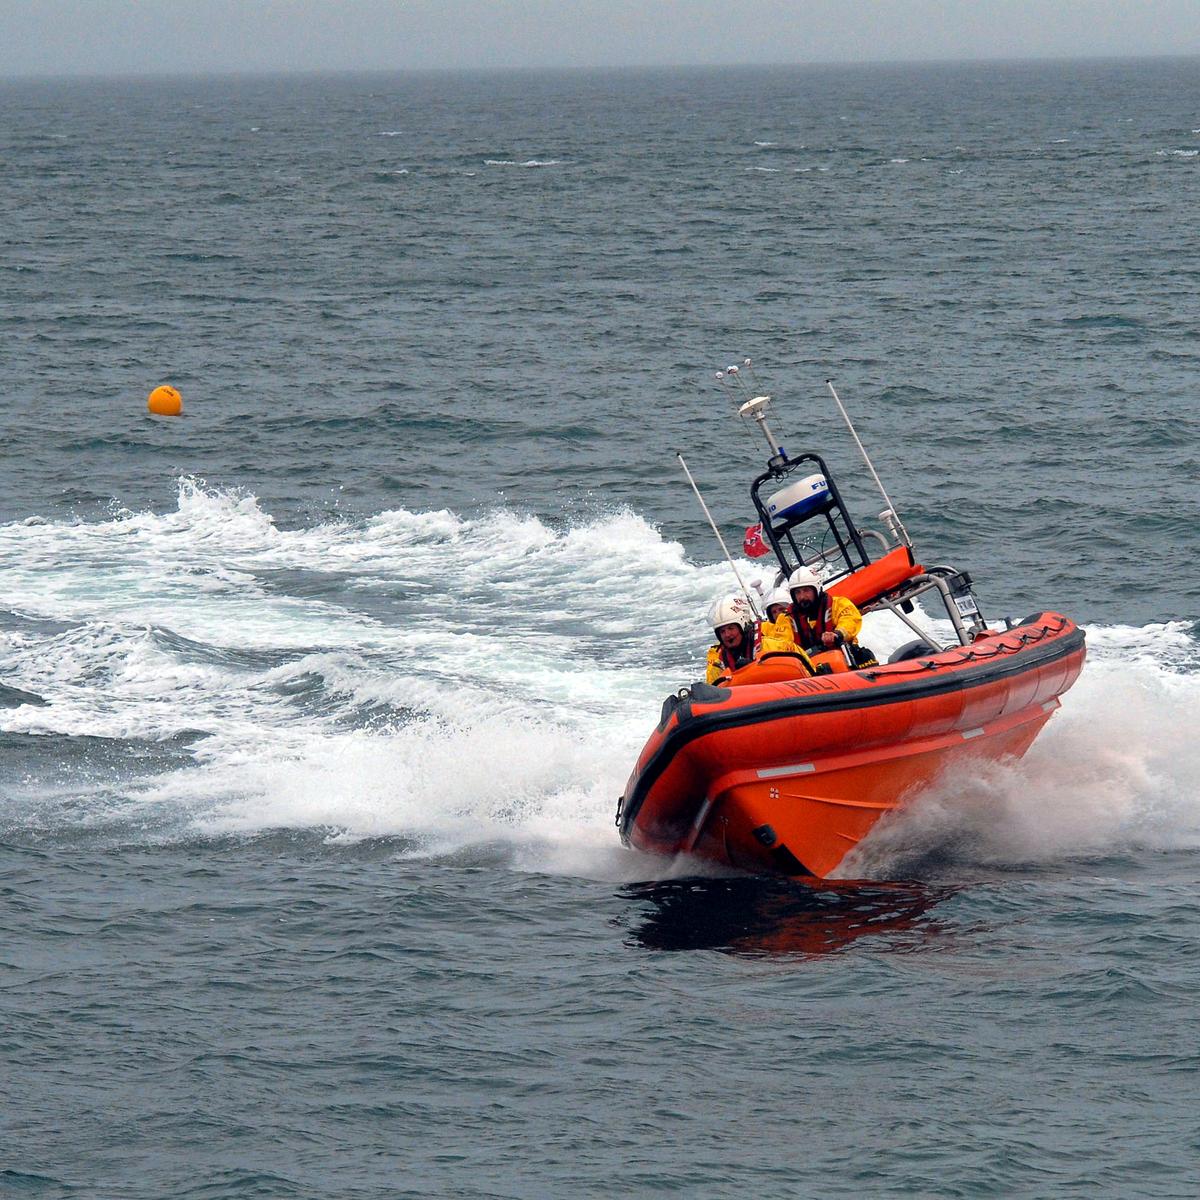 Lifeboat crew called to help paddleboarders